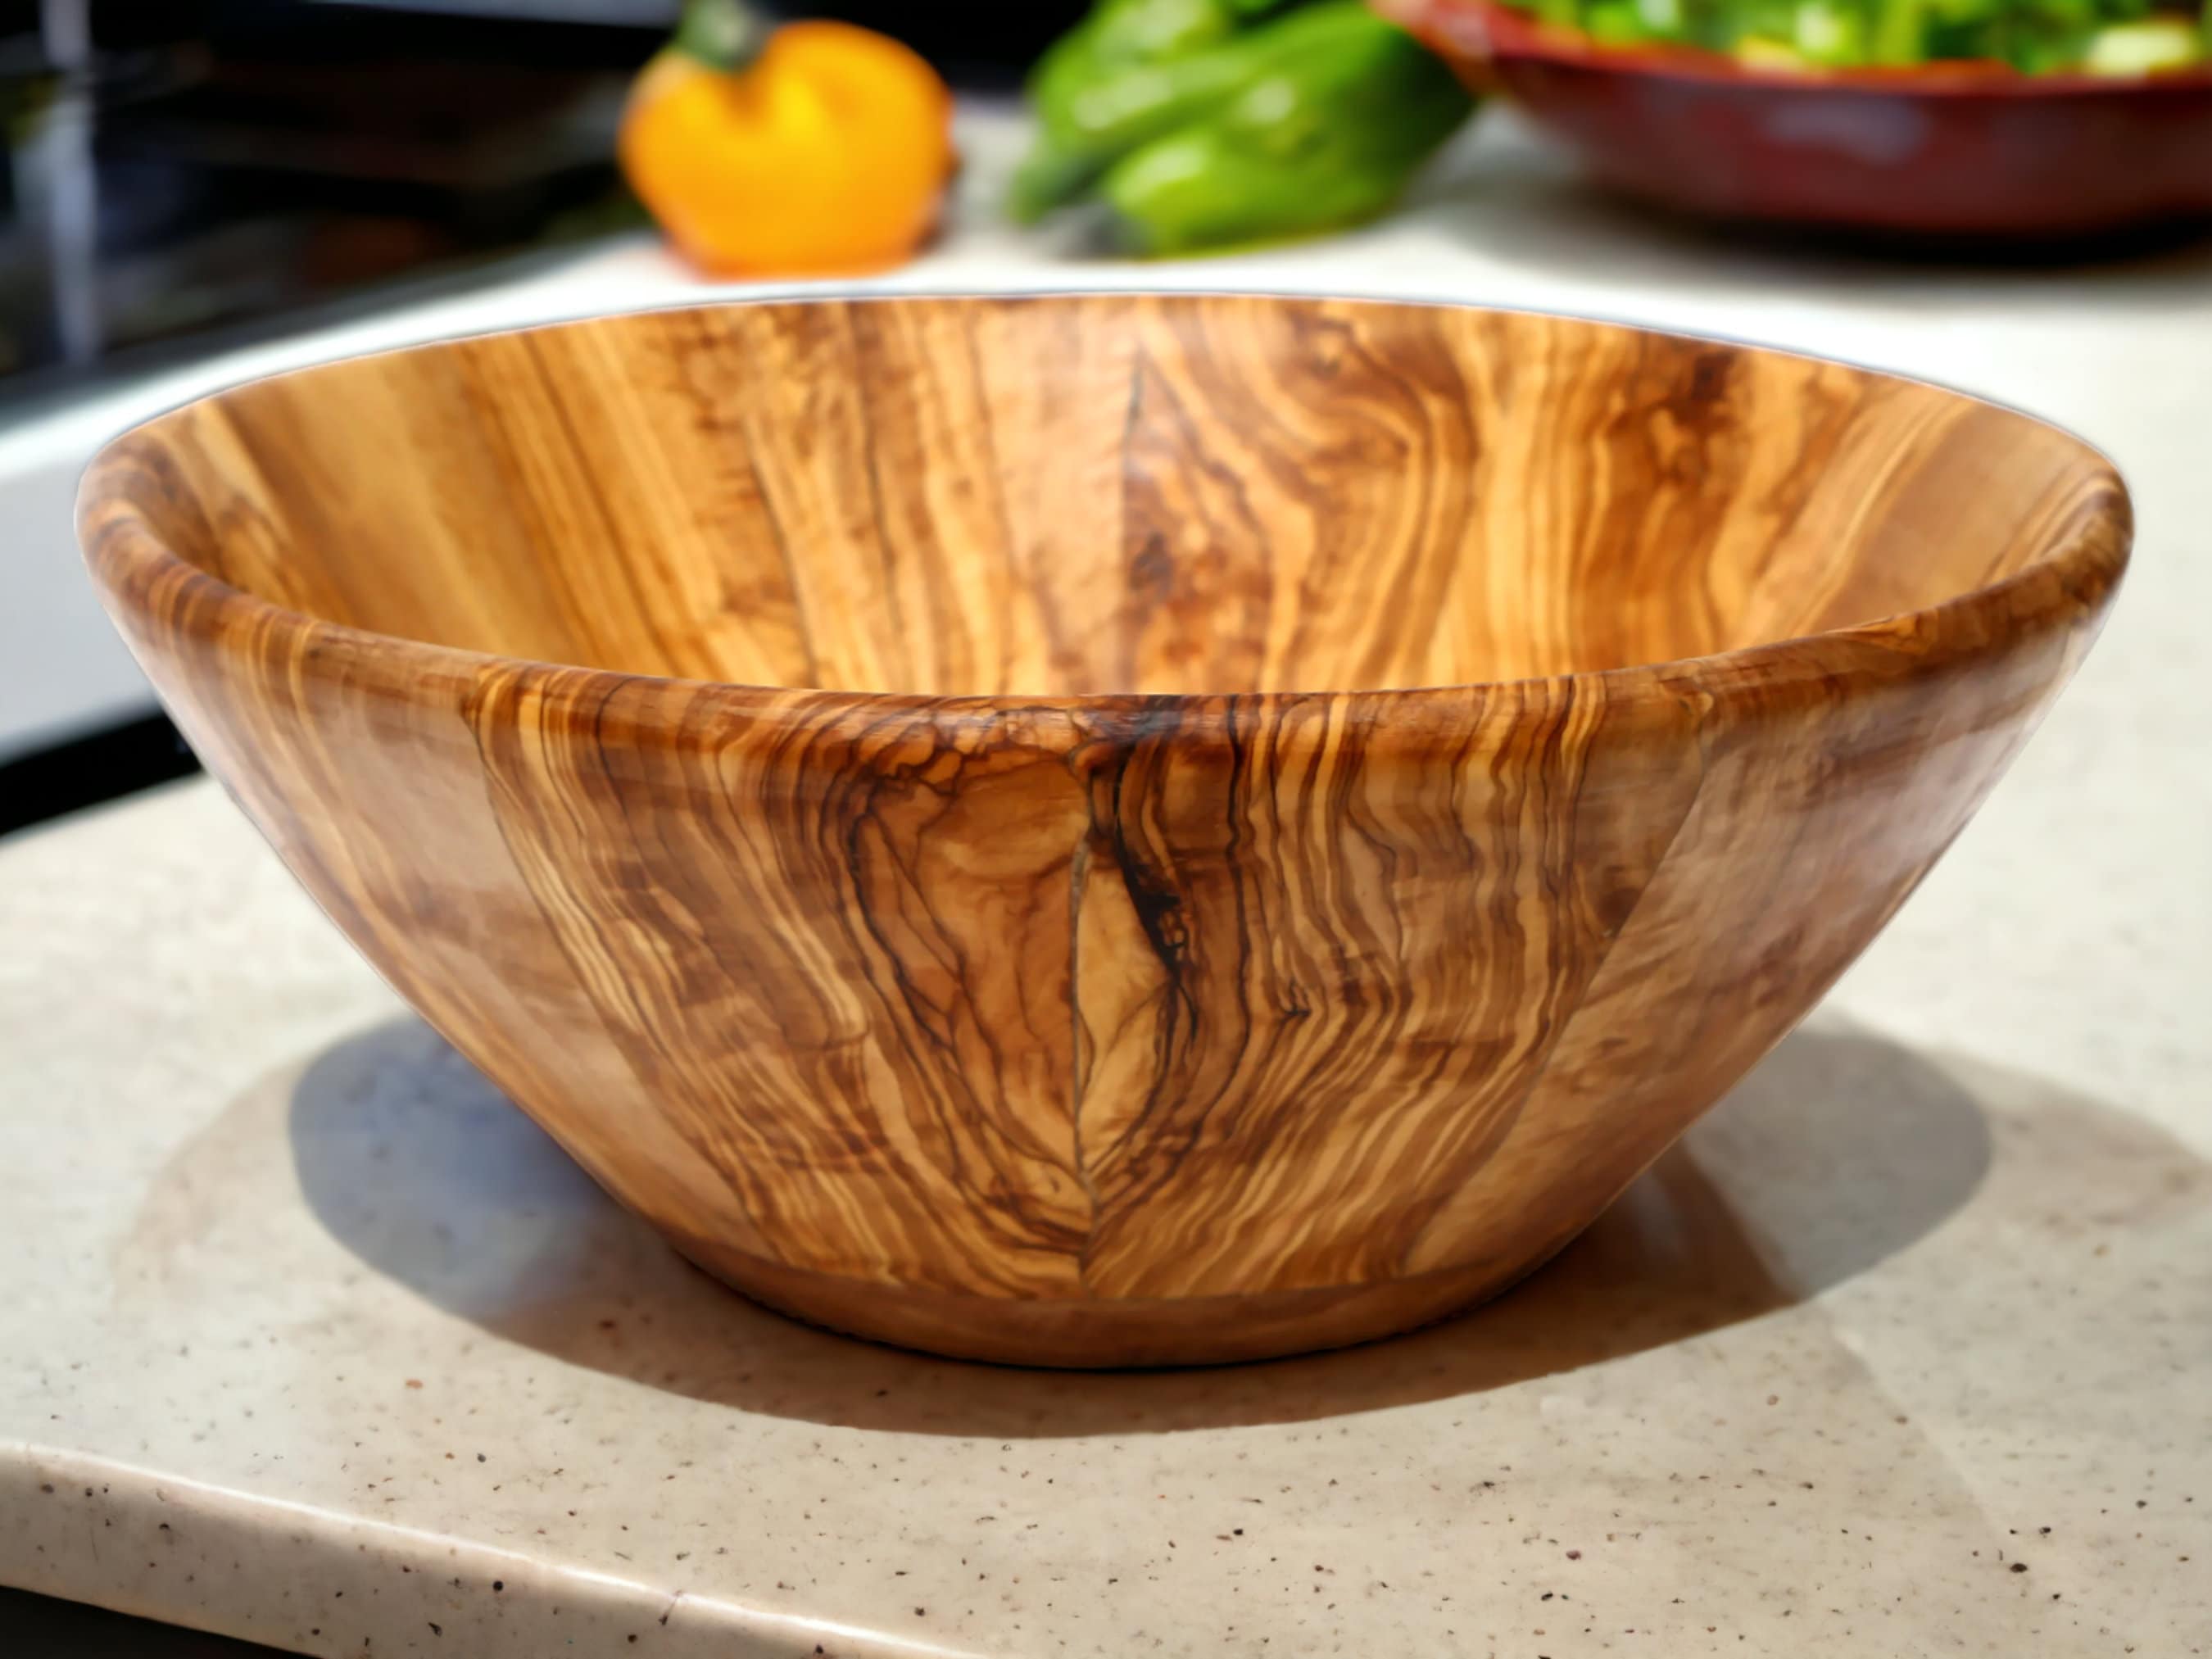 Handmade Olive Wood Yarn Bowl, Crochet Bowl, Knitting Bowl, Made of Olive  Wood, With Rich Grain, by Josef Woodturner 